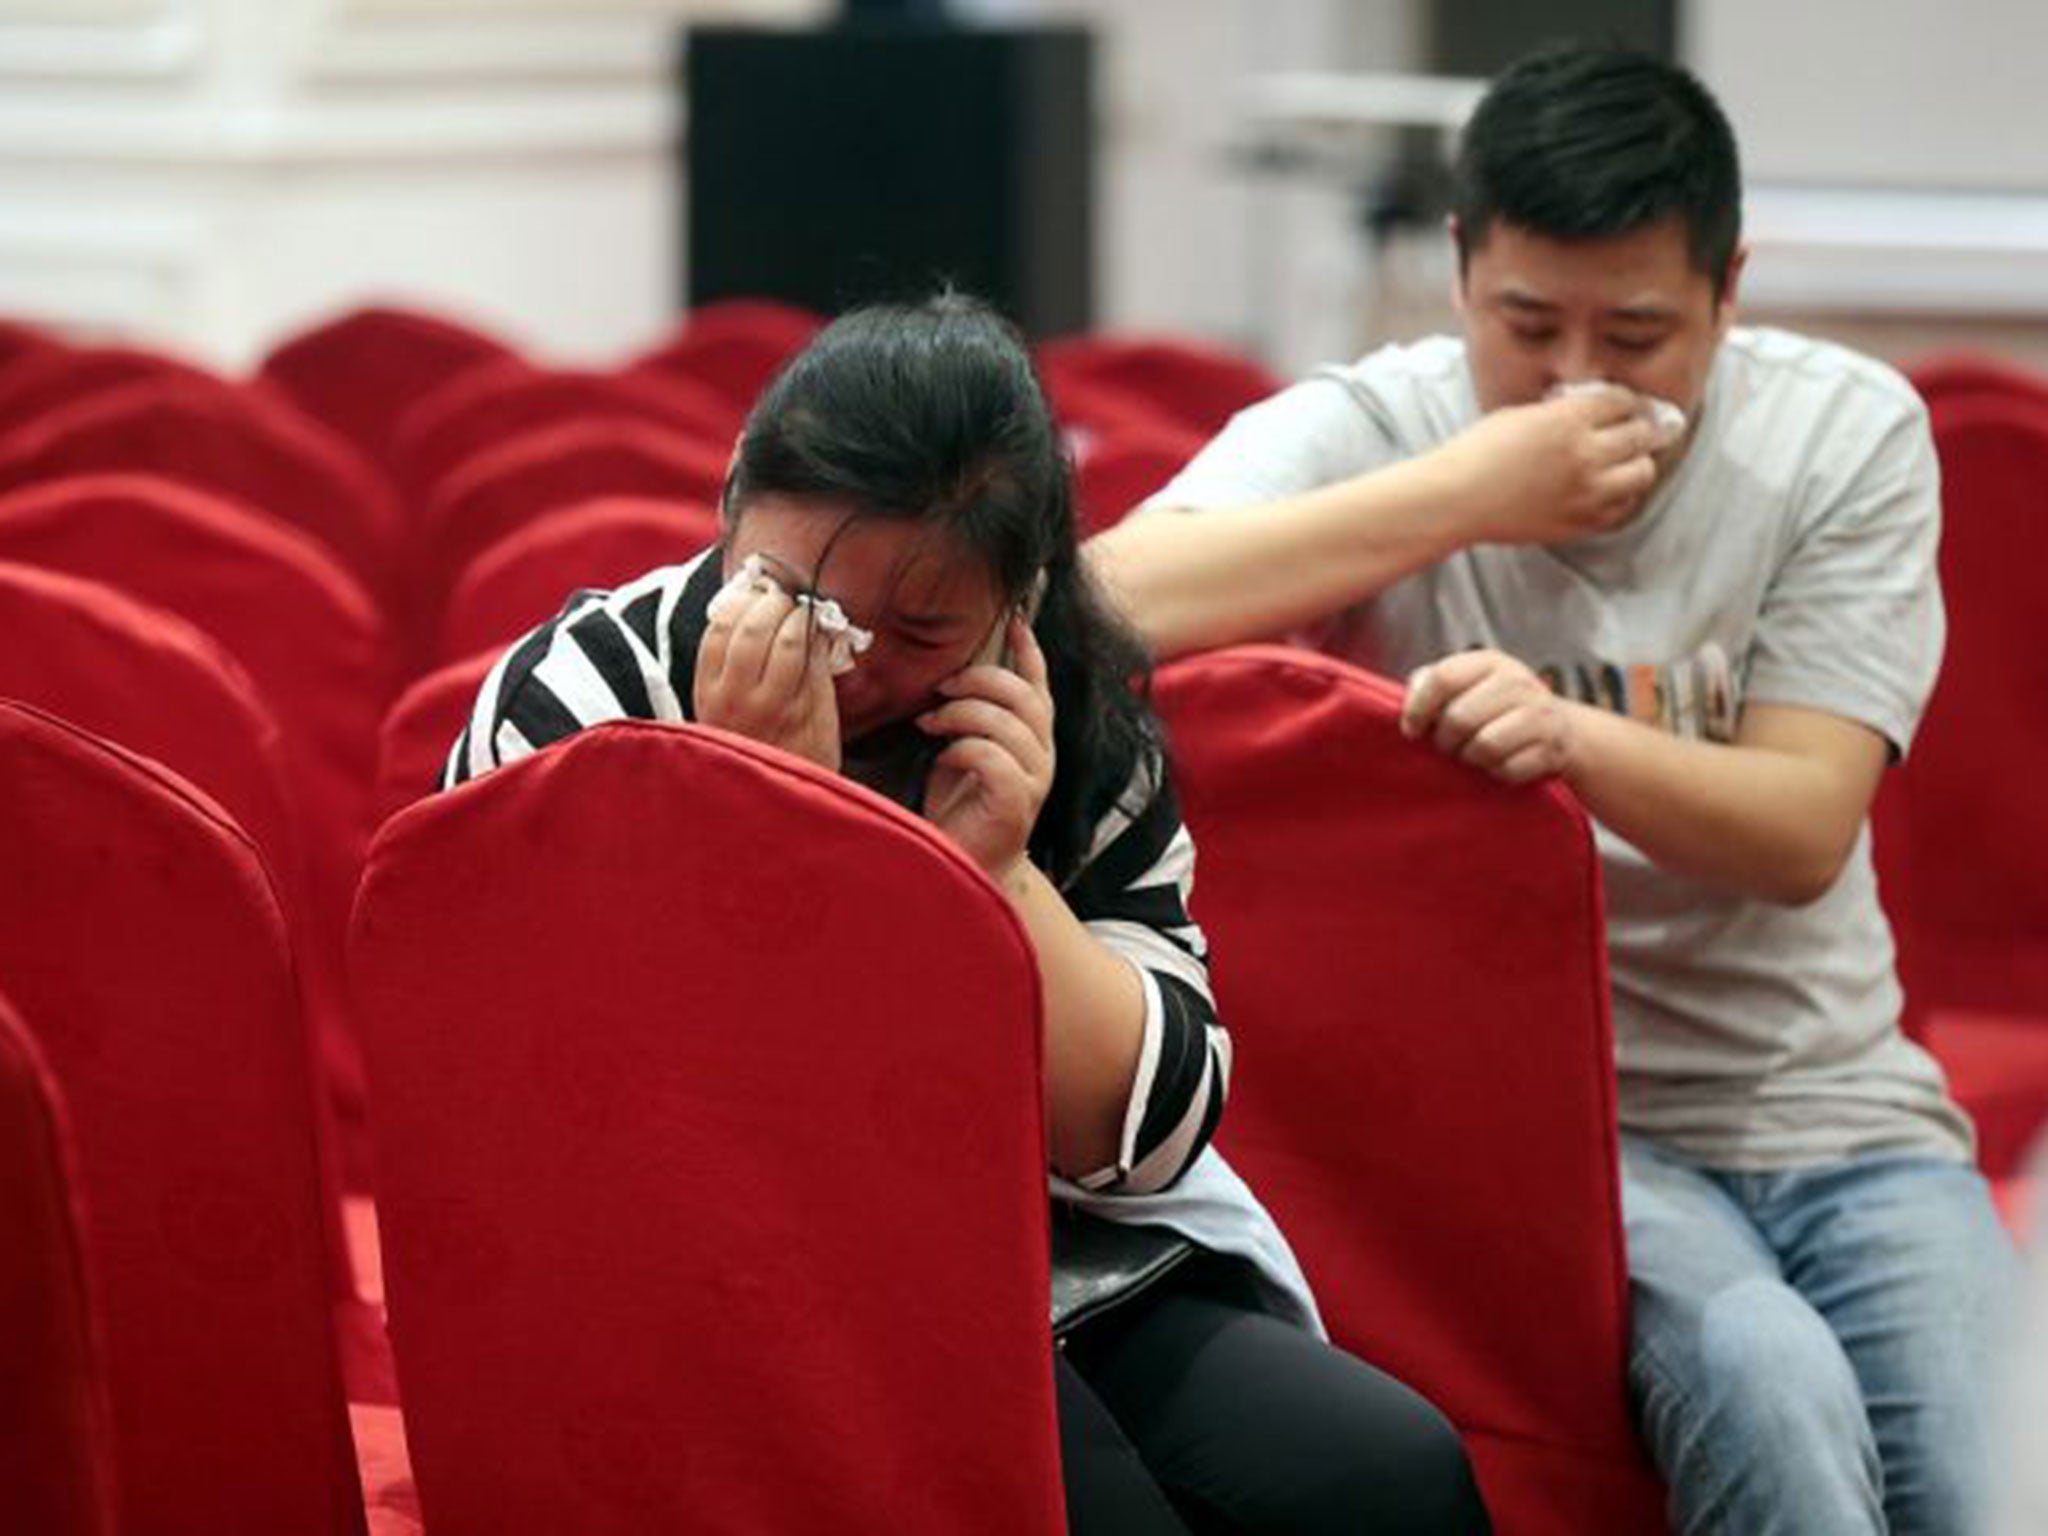 Relatives of passengers on the capsized ship Dongfangzhixing wait for news